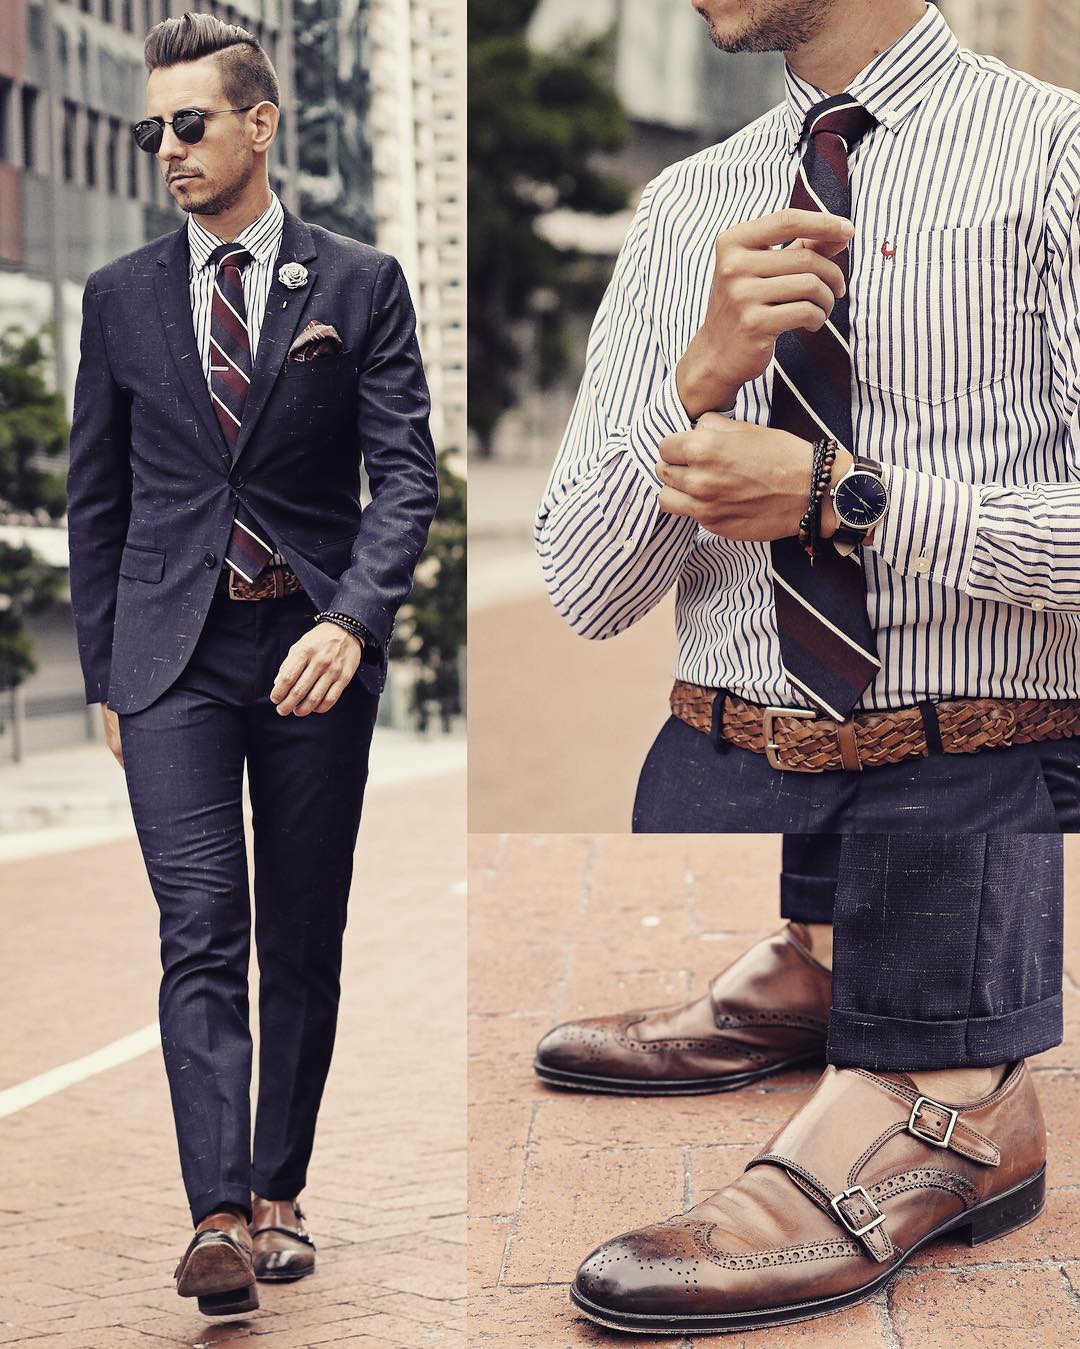 Suit ,Shoes And Watch Combinations For Men